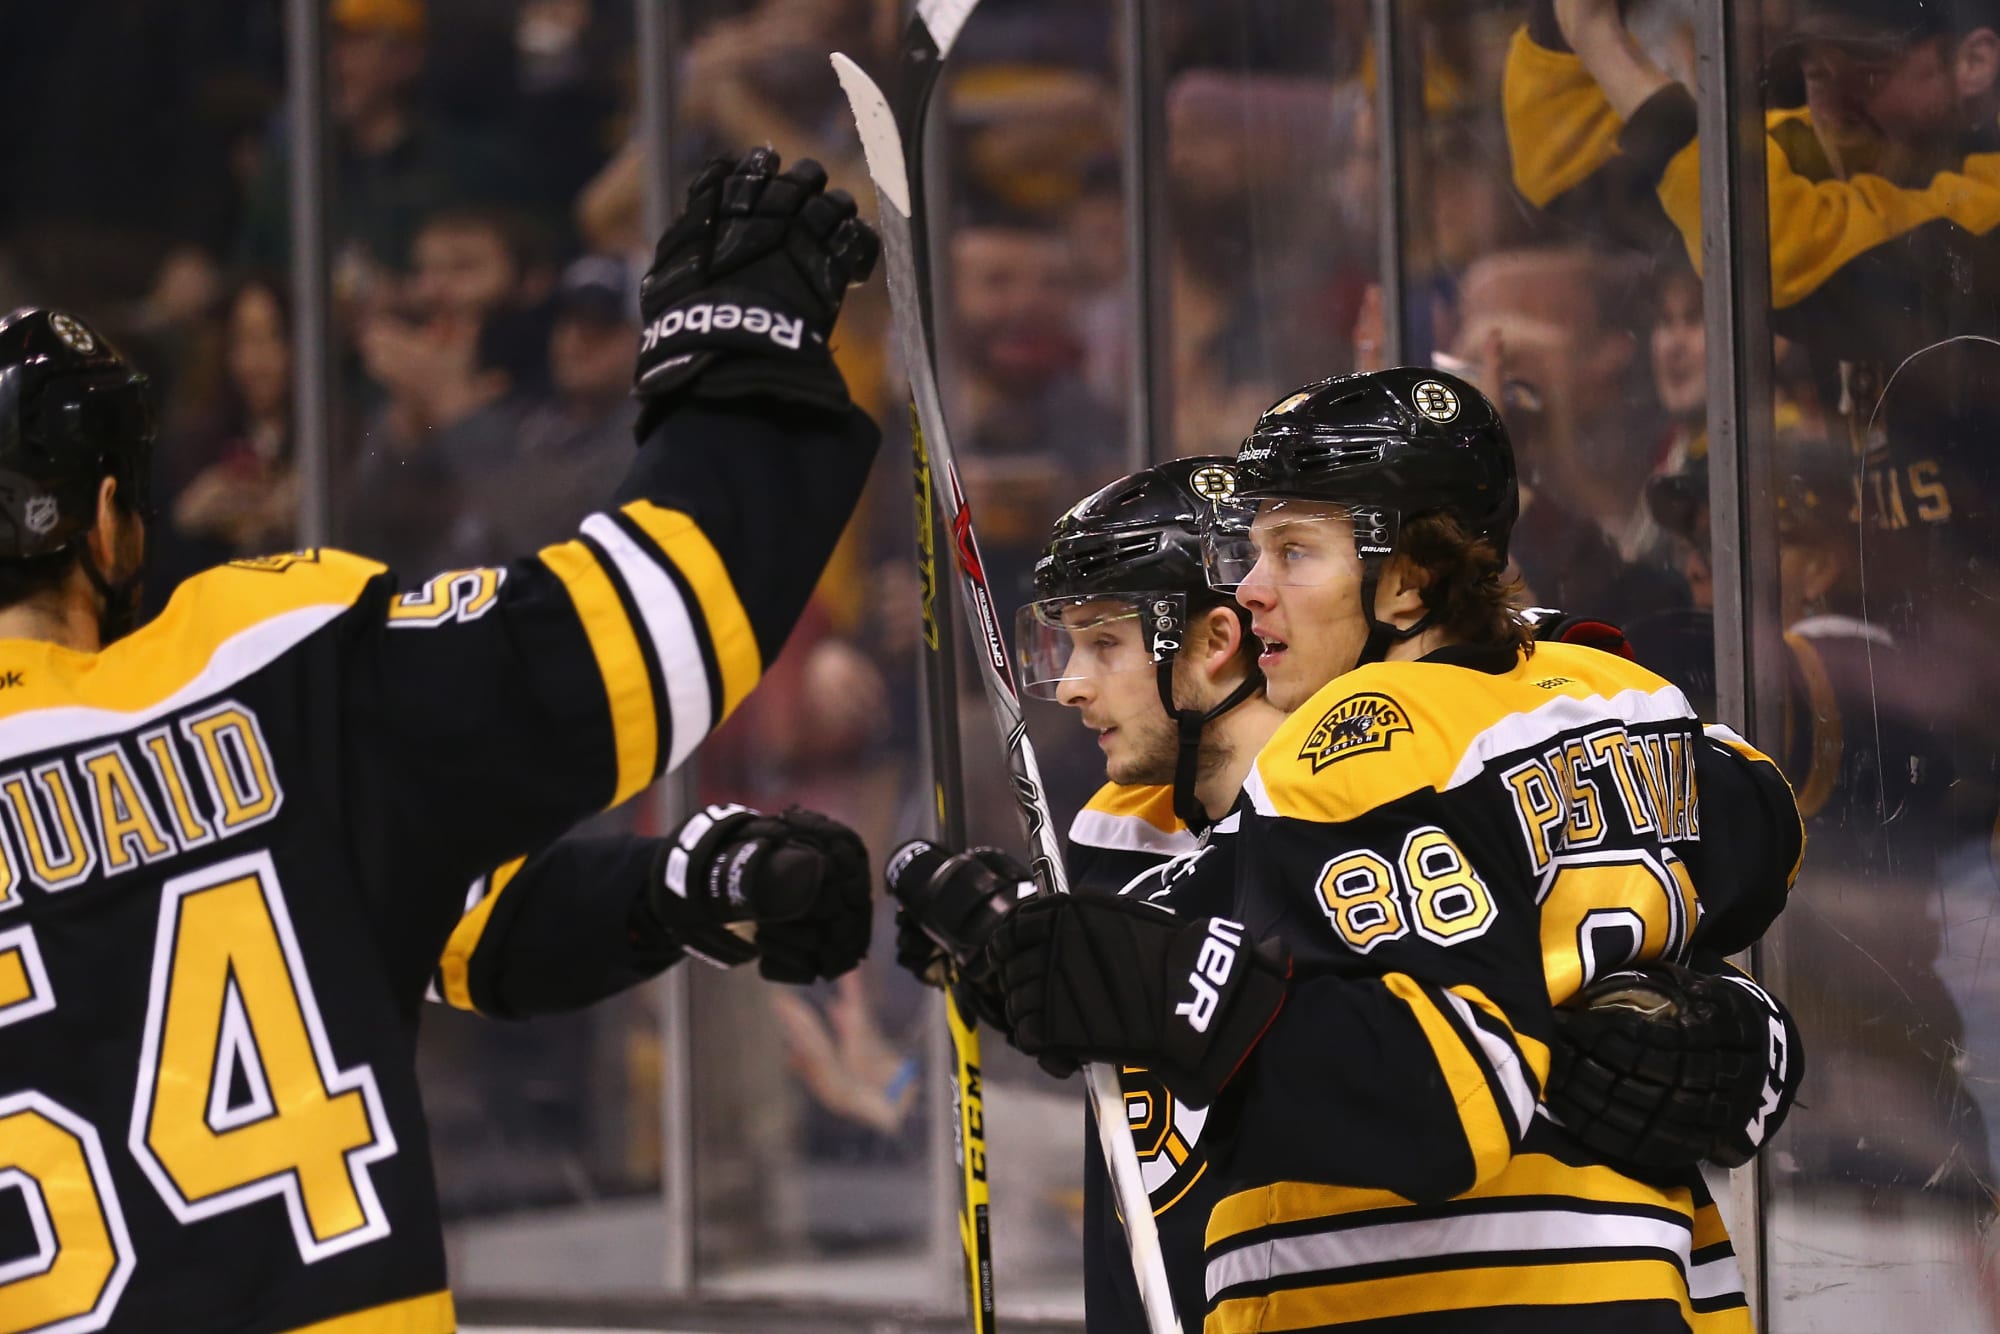 Boston Bruins projected lines and pairings before the season opener